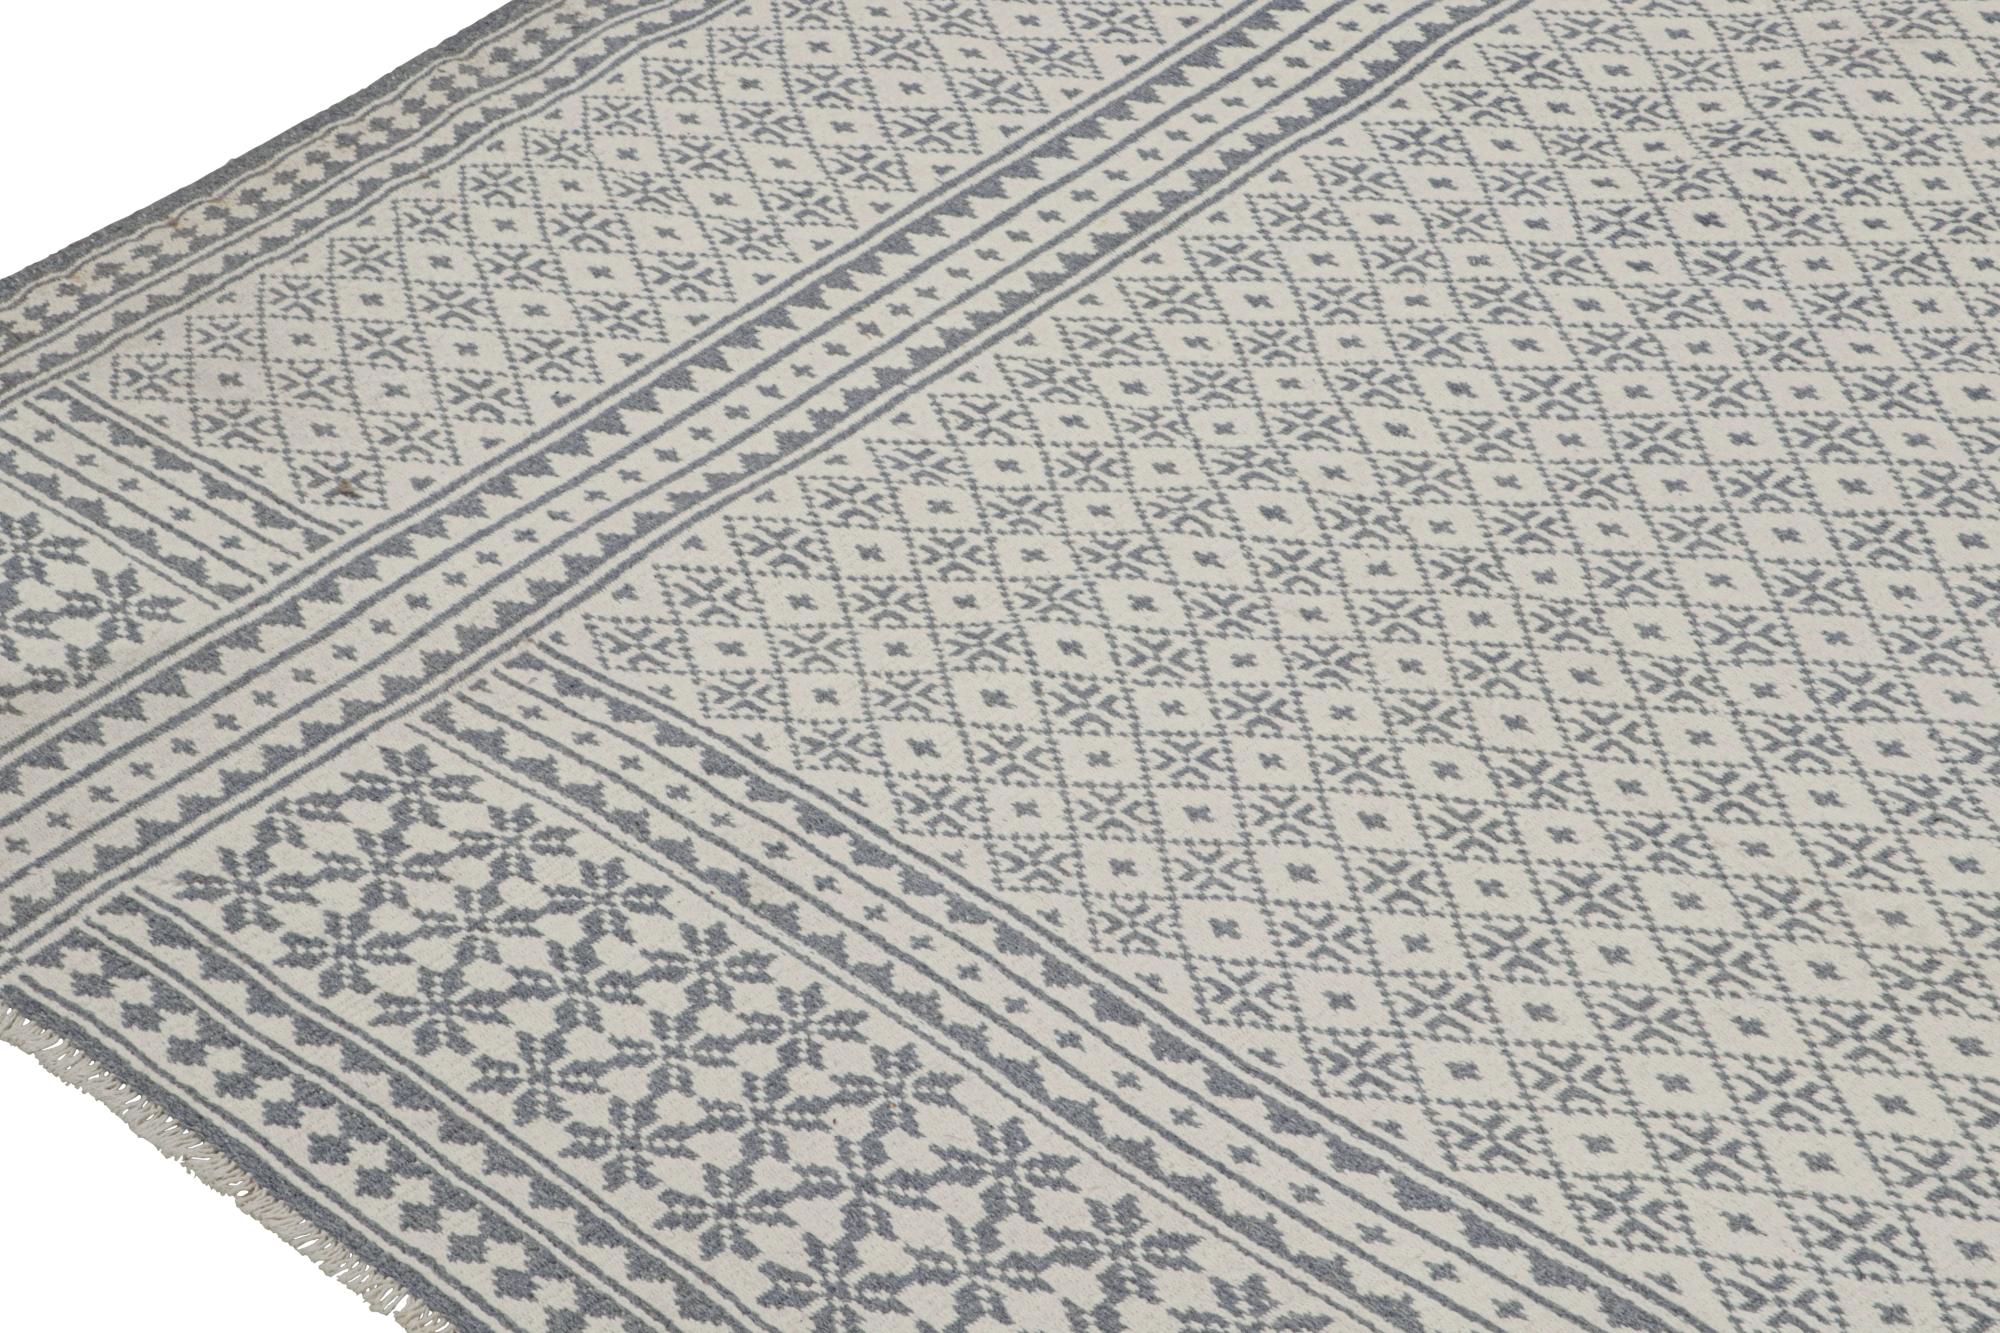 Tribal Rug & Kilim’s Zilu Style Kilim in White and Blue-Gray Geometric Pattern  For Sale